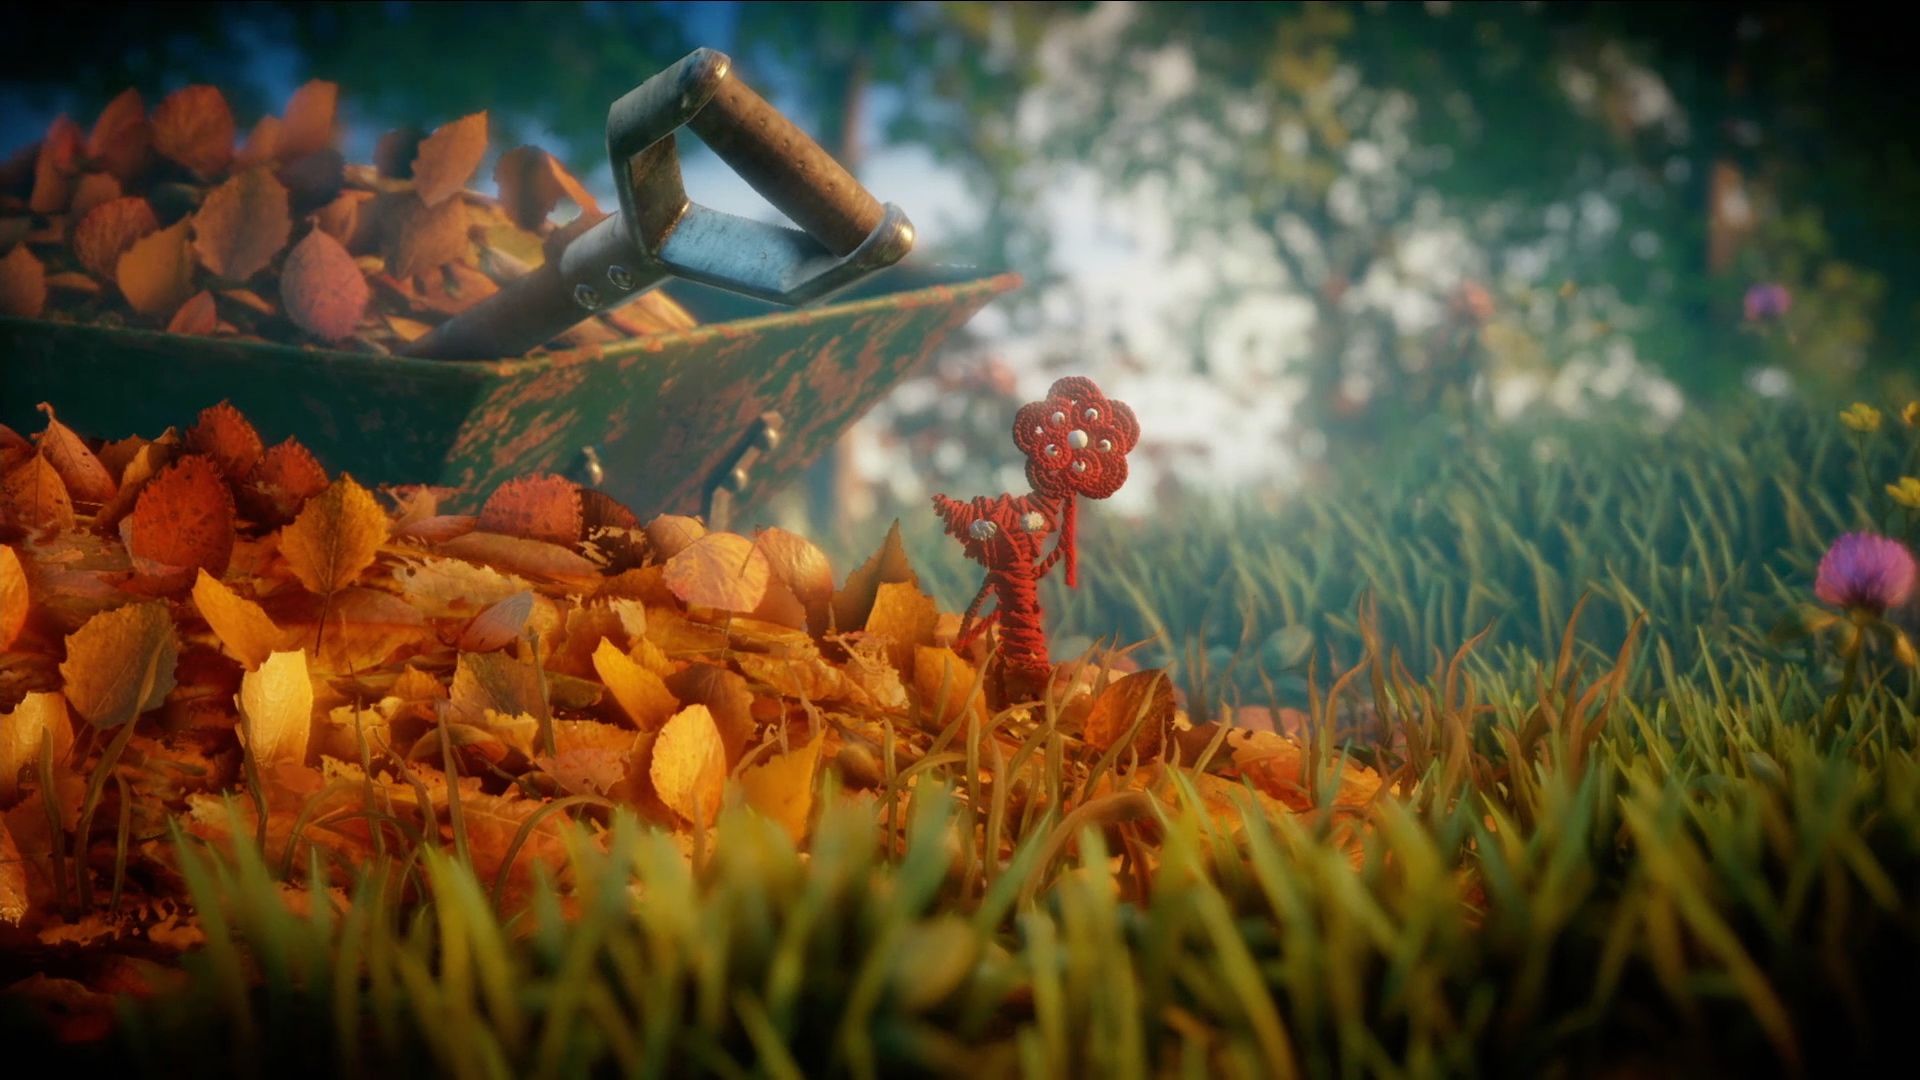 Unravel Wallpapers